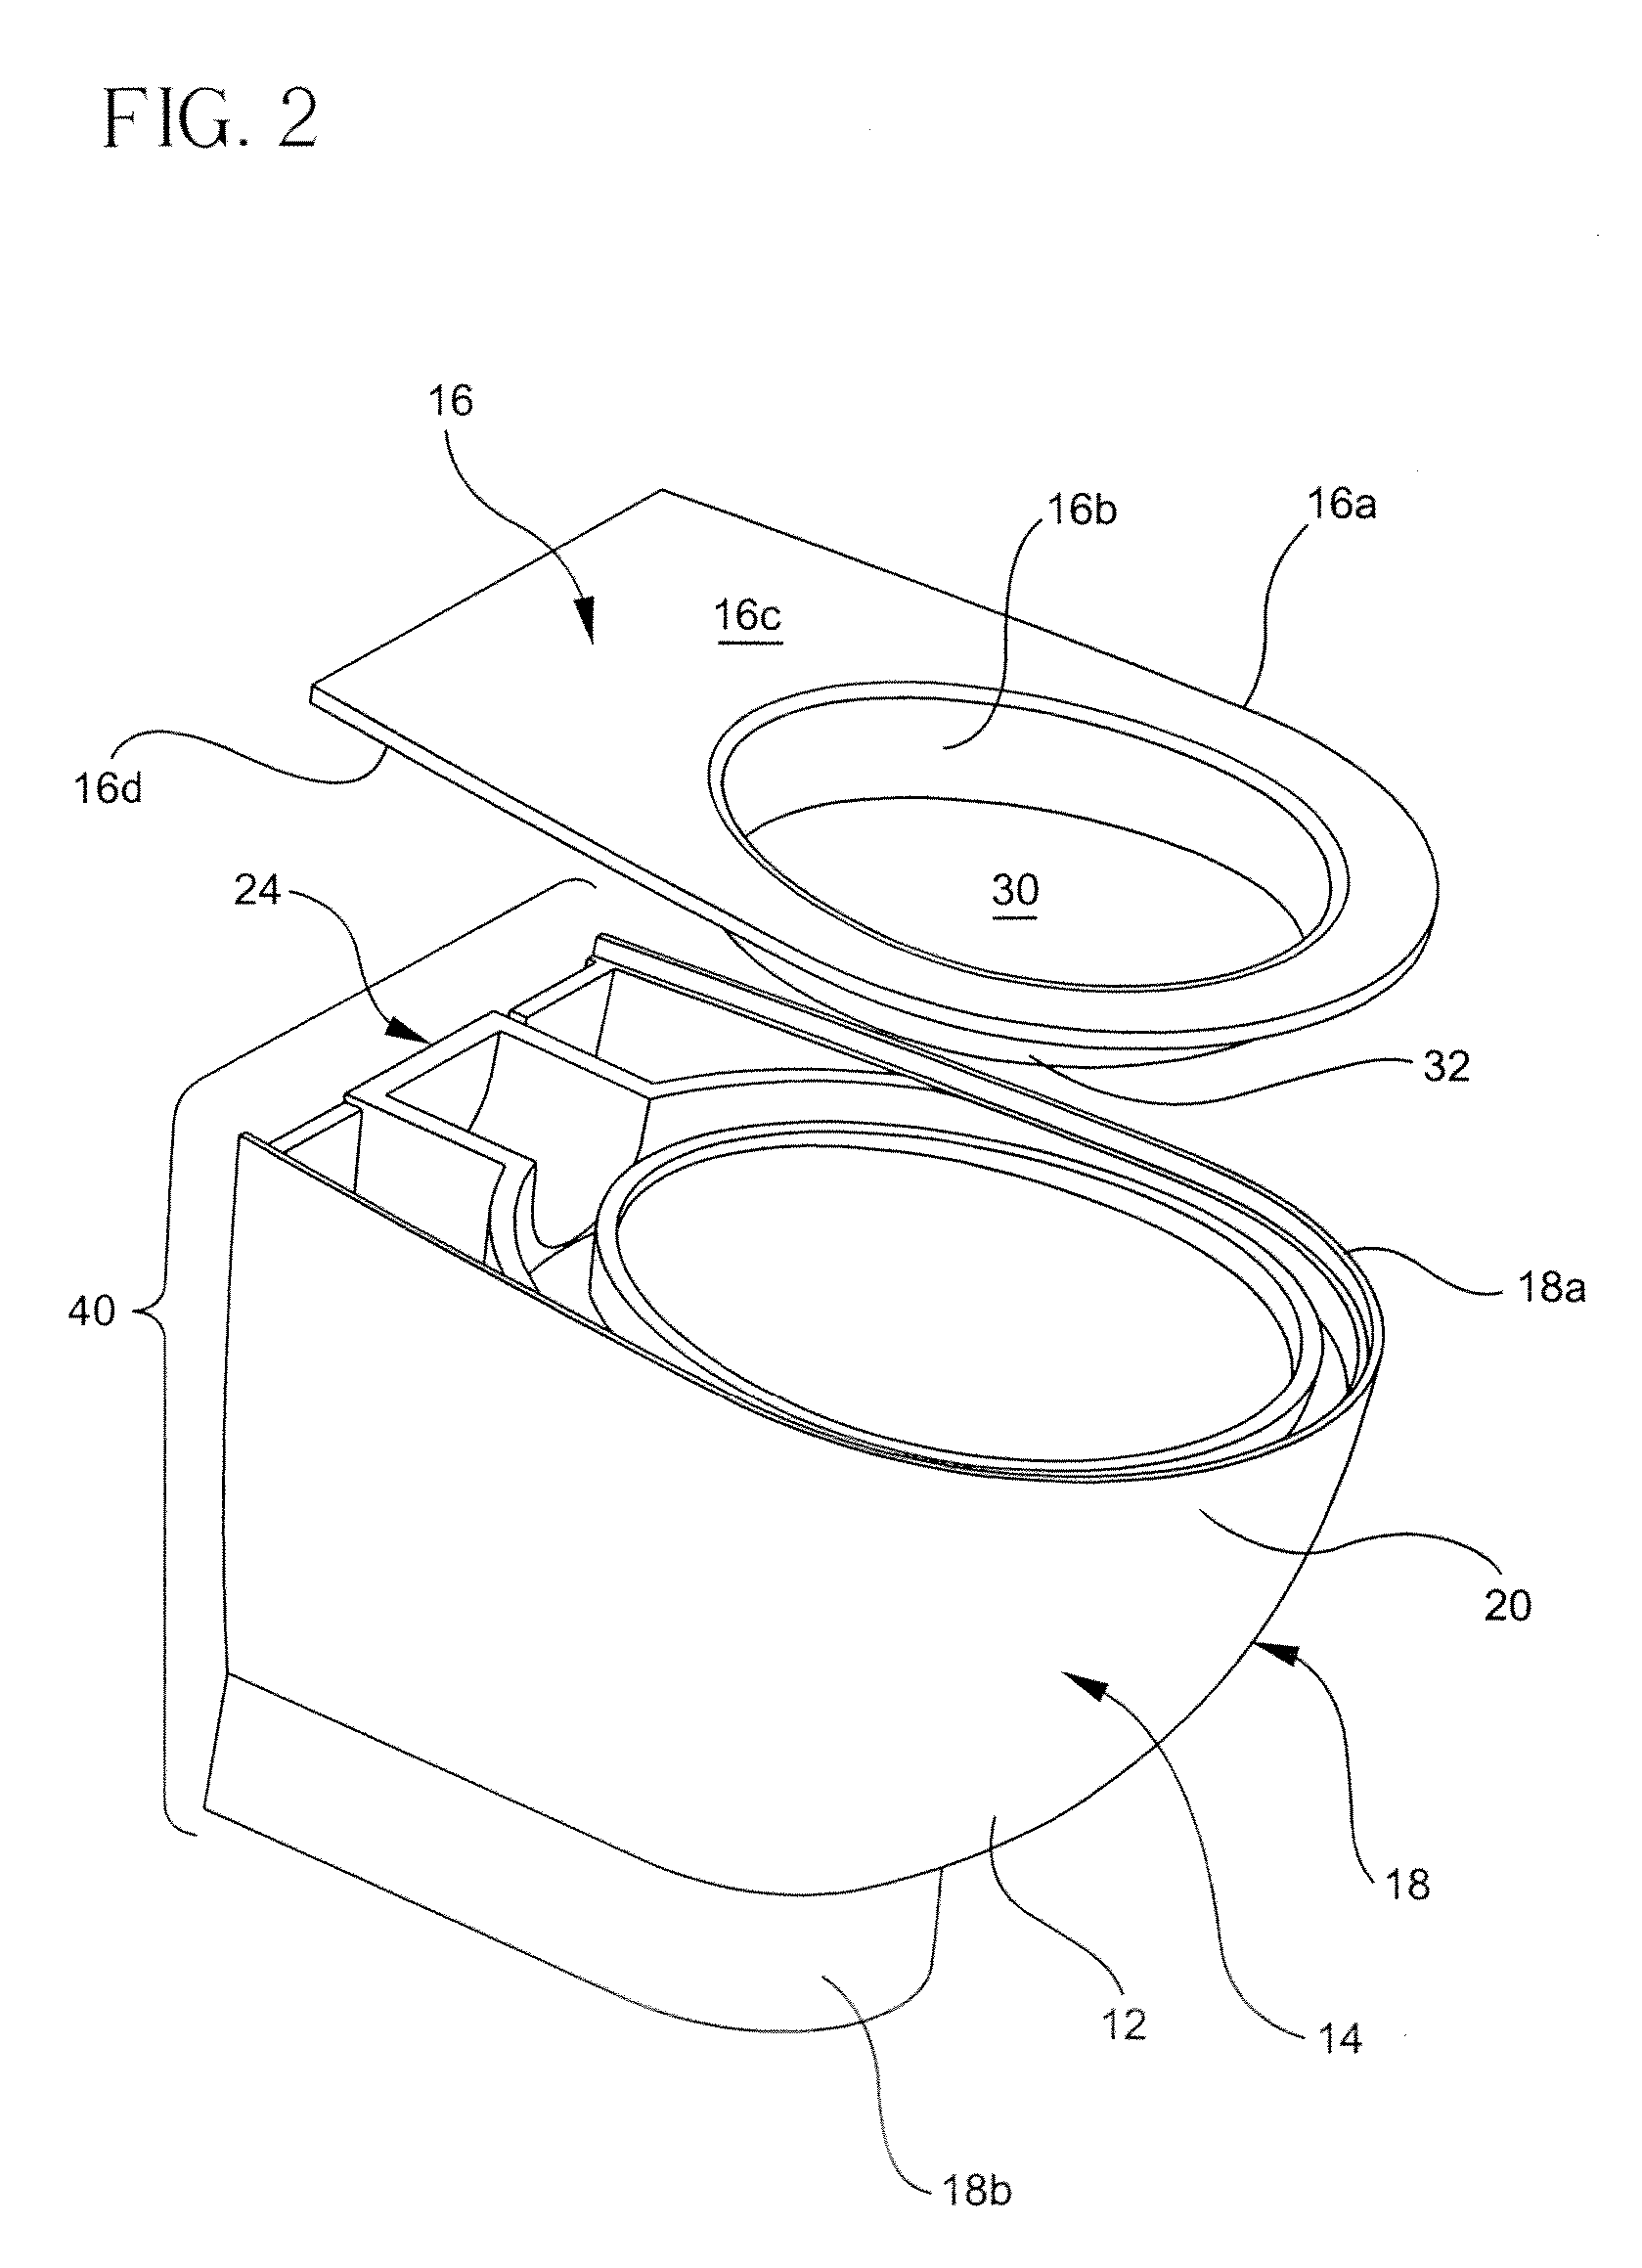 System and Method for Casting Toilet Bowls